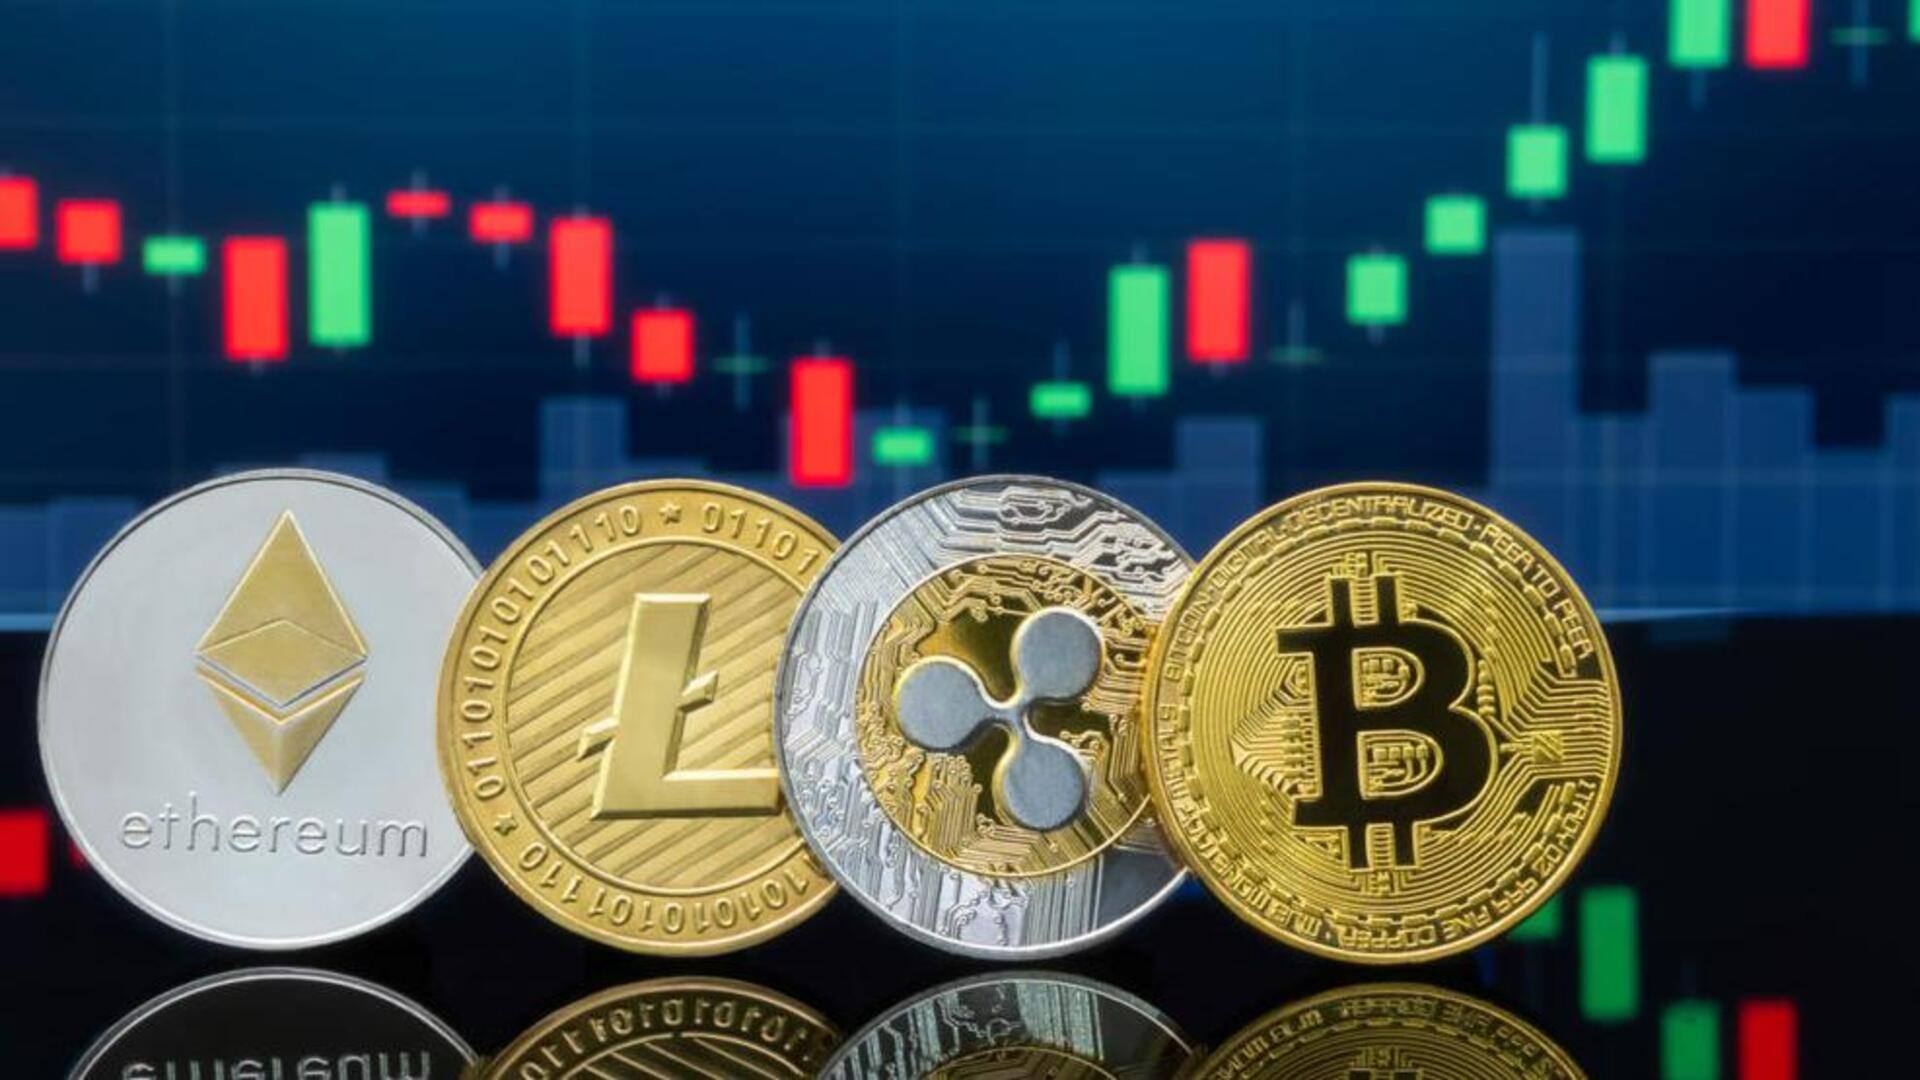 Cryptocurrency prices: Check today's rates of Bitcoin, Ethereum, Cardano, Solana